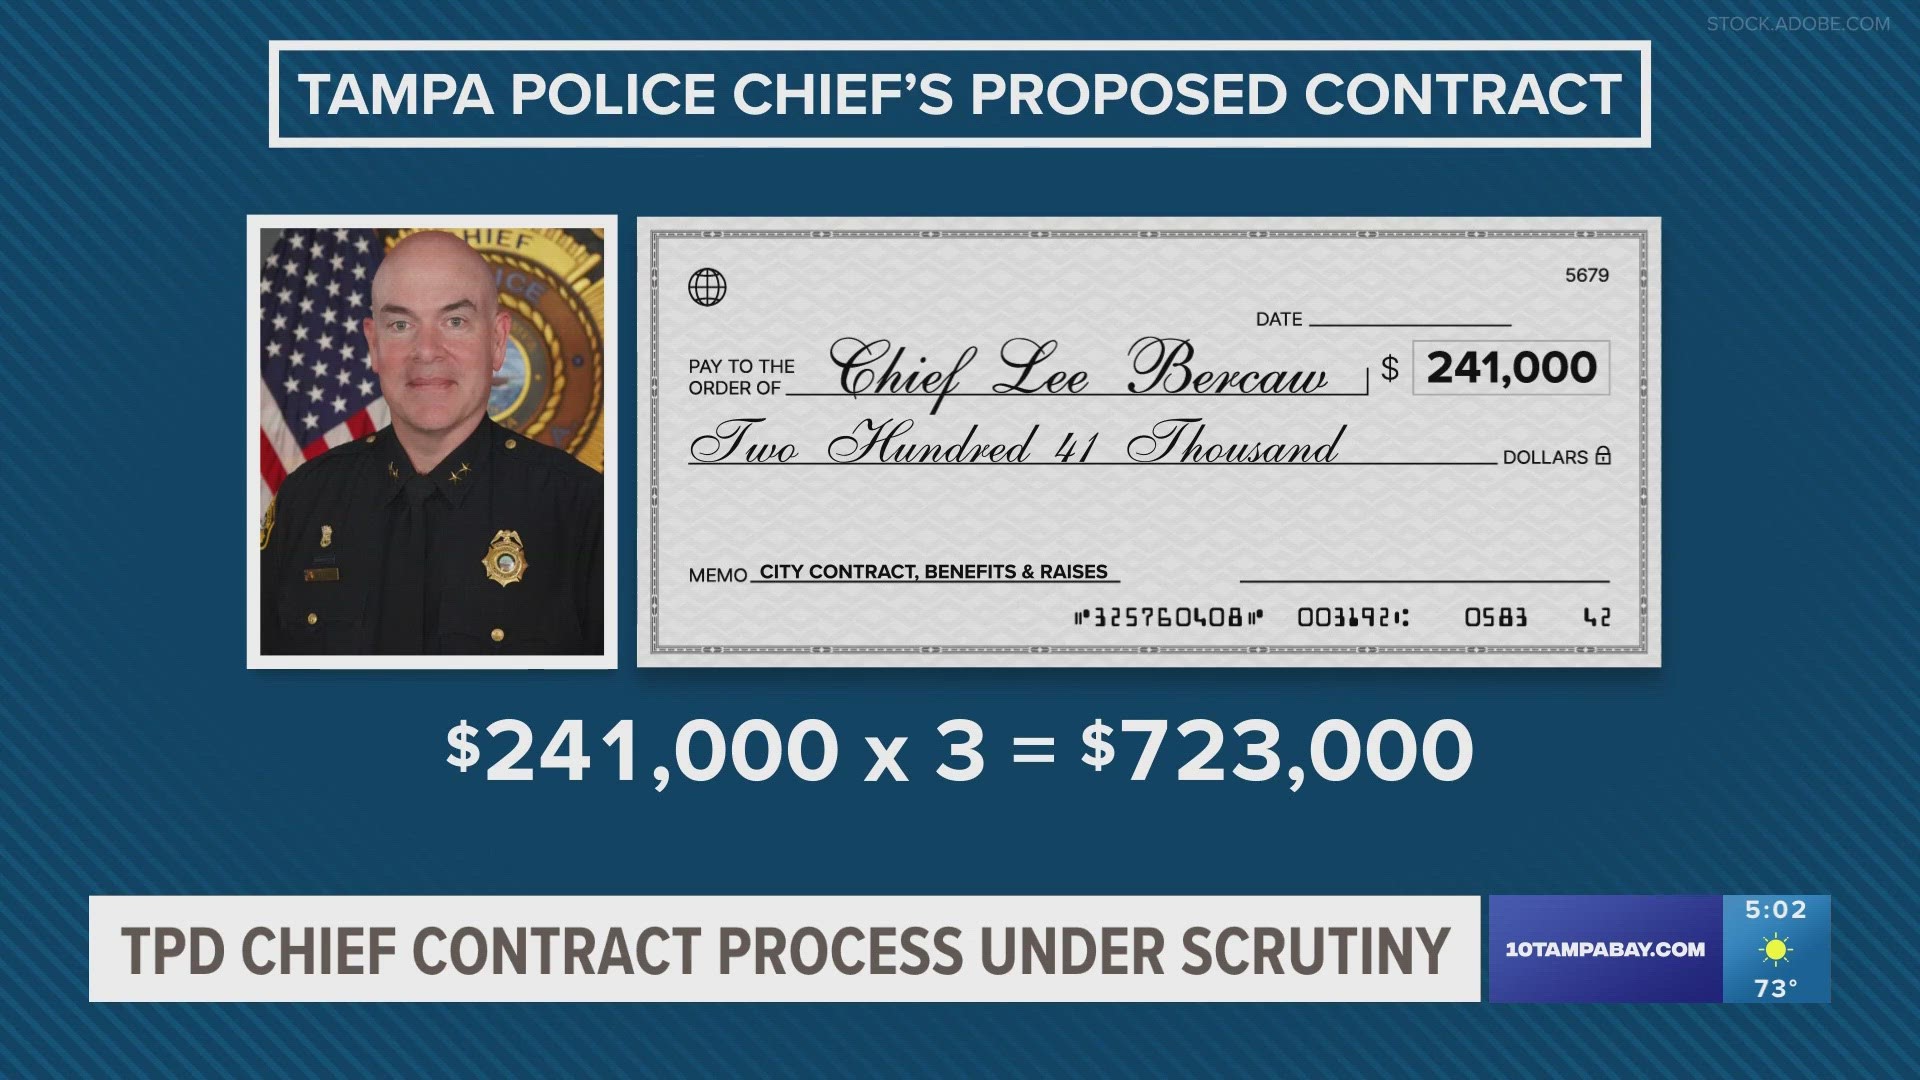 The city also approved a six-figure contract for Mayor Jane Castor when she was police chief. She received a $500,000 "drop" plus $113,000 for her annual pension.